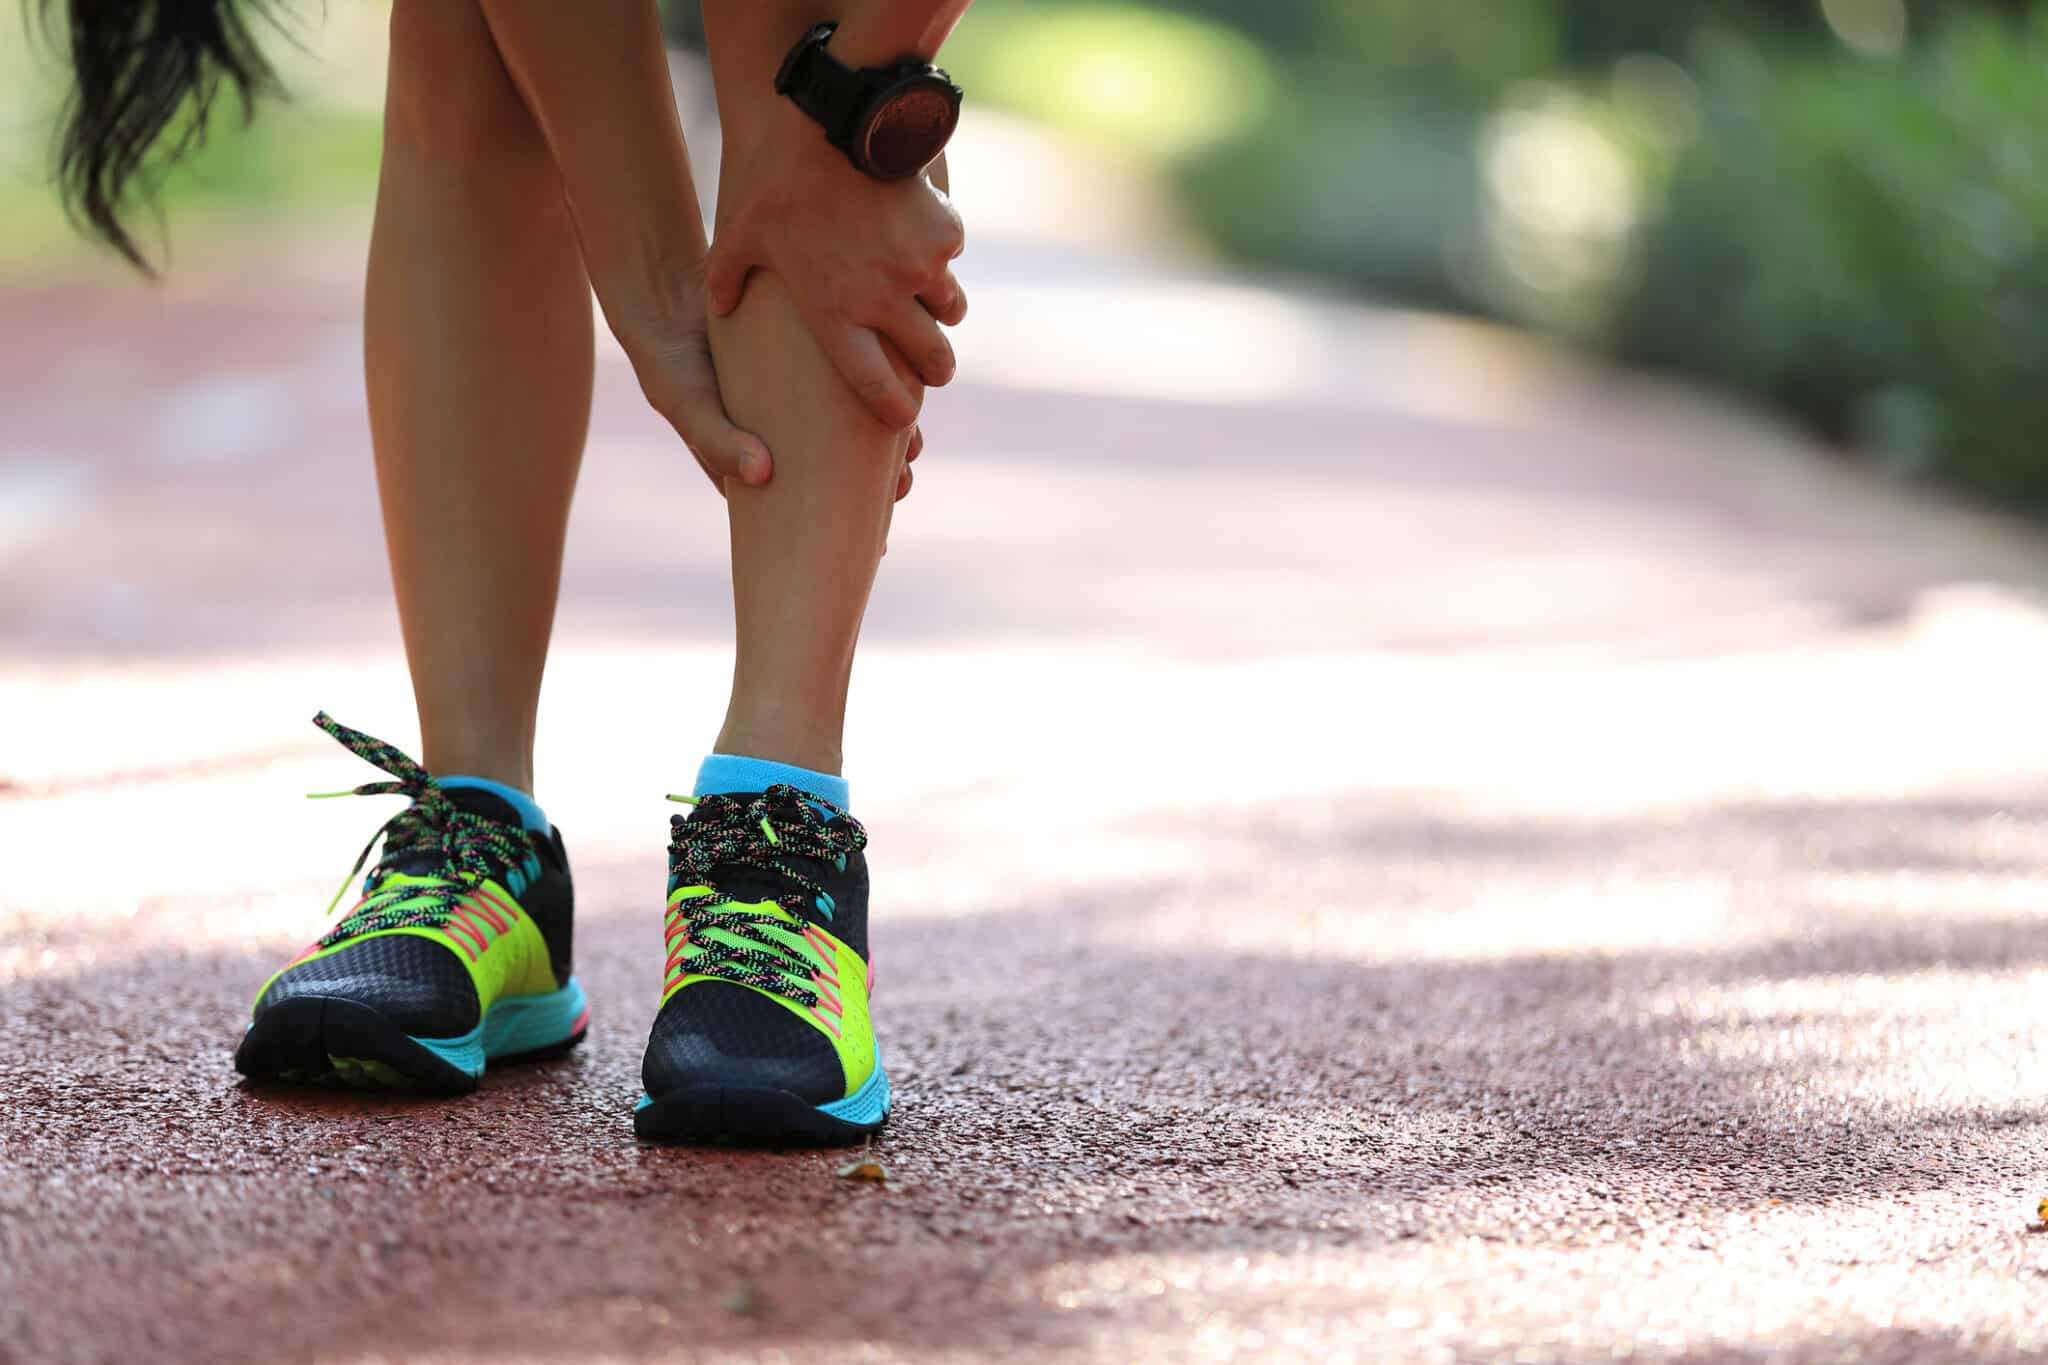 How Long Does Medial Tibial Stress Syndrome Last?